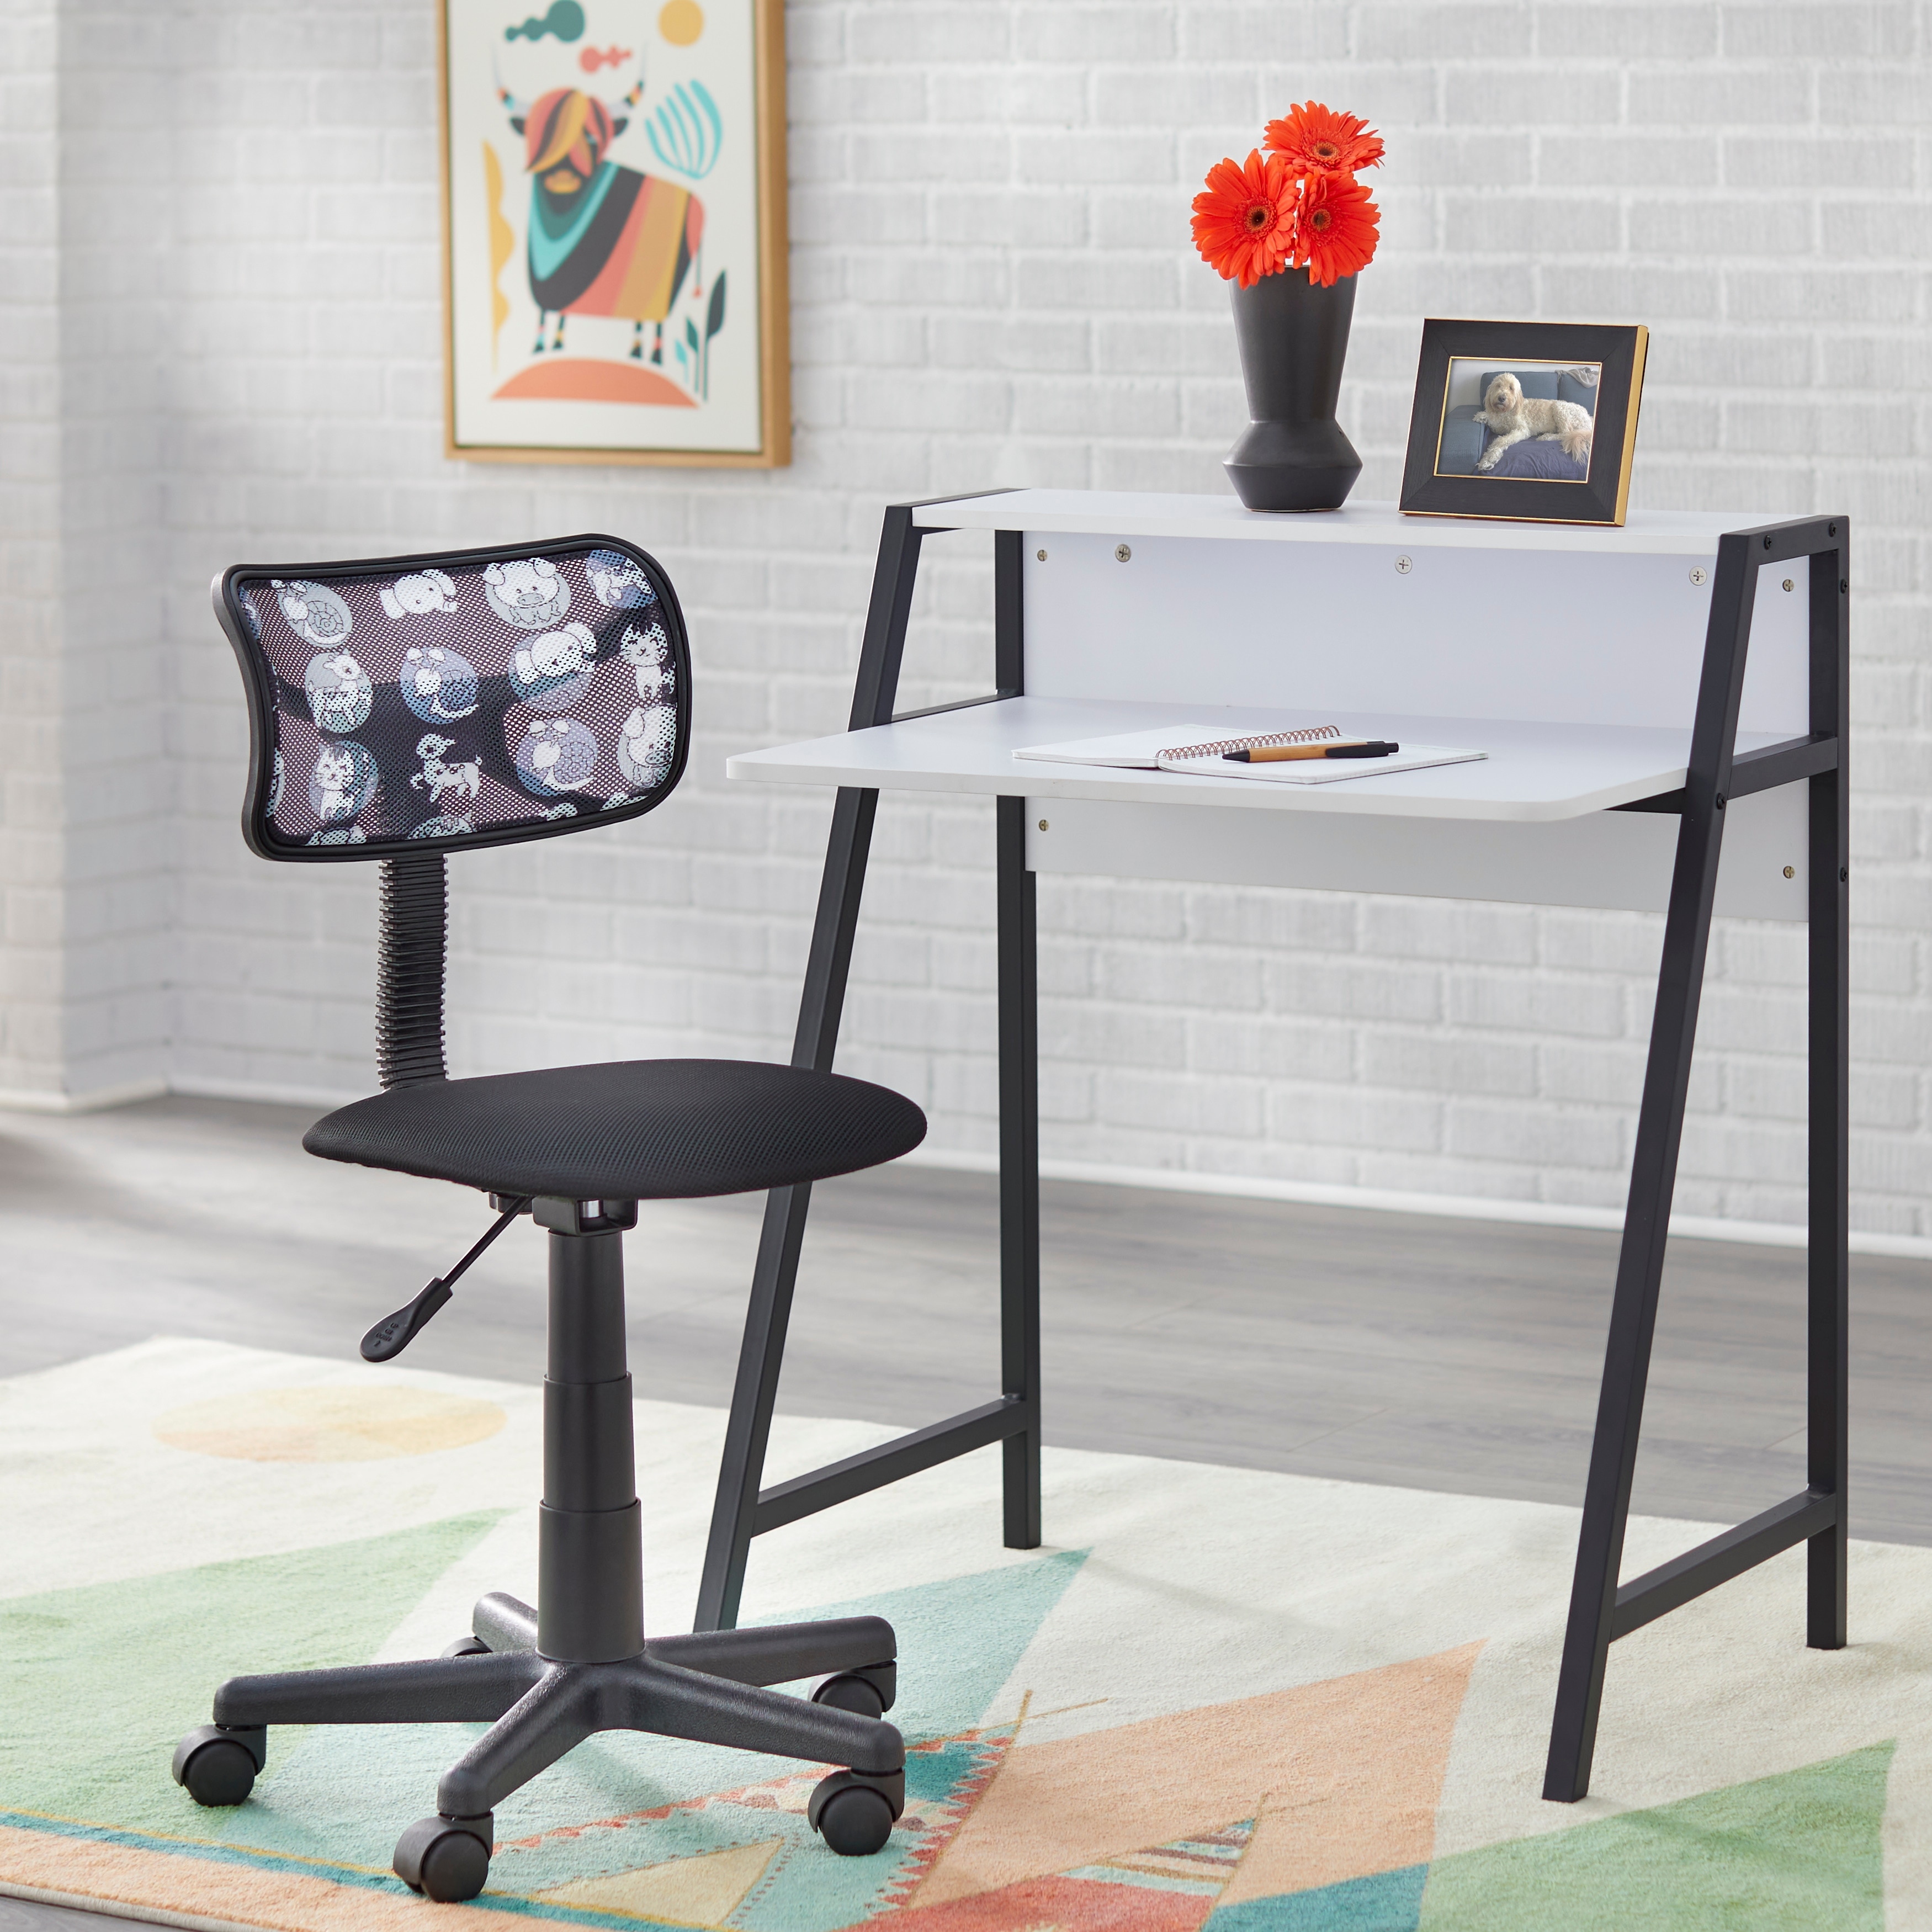 https://ak1.ostkcdn.com/images/products/is/images/direct/1593ebd55de6c0877419fe3e910a1f0bb0c82c9a/Simple-Living-Amari-Kids-Desk-and-Chair-Set.jpg